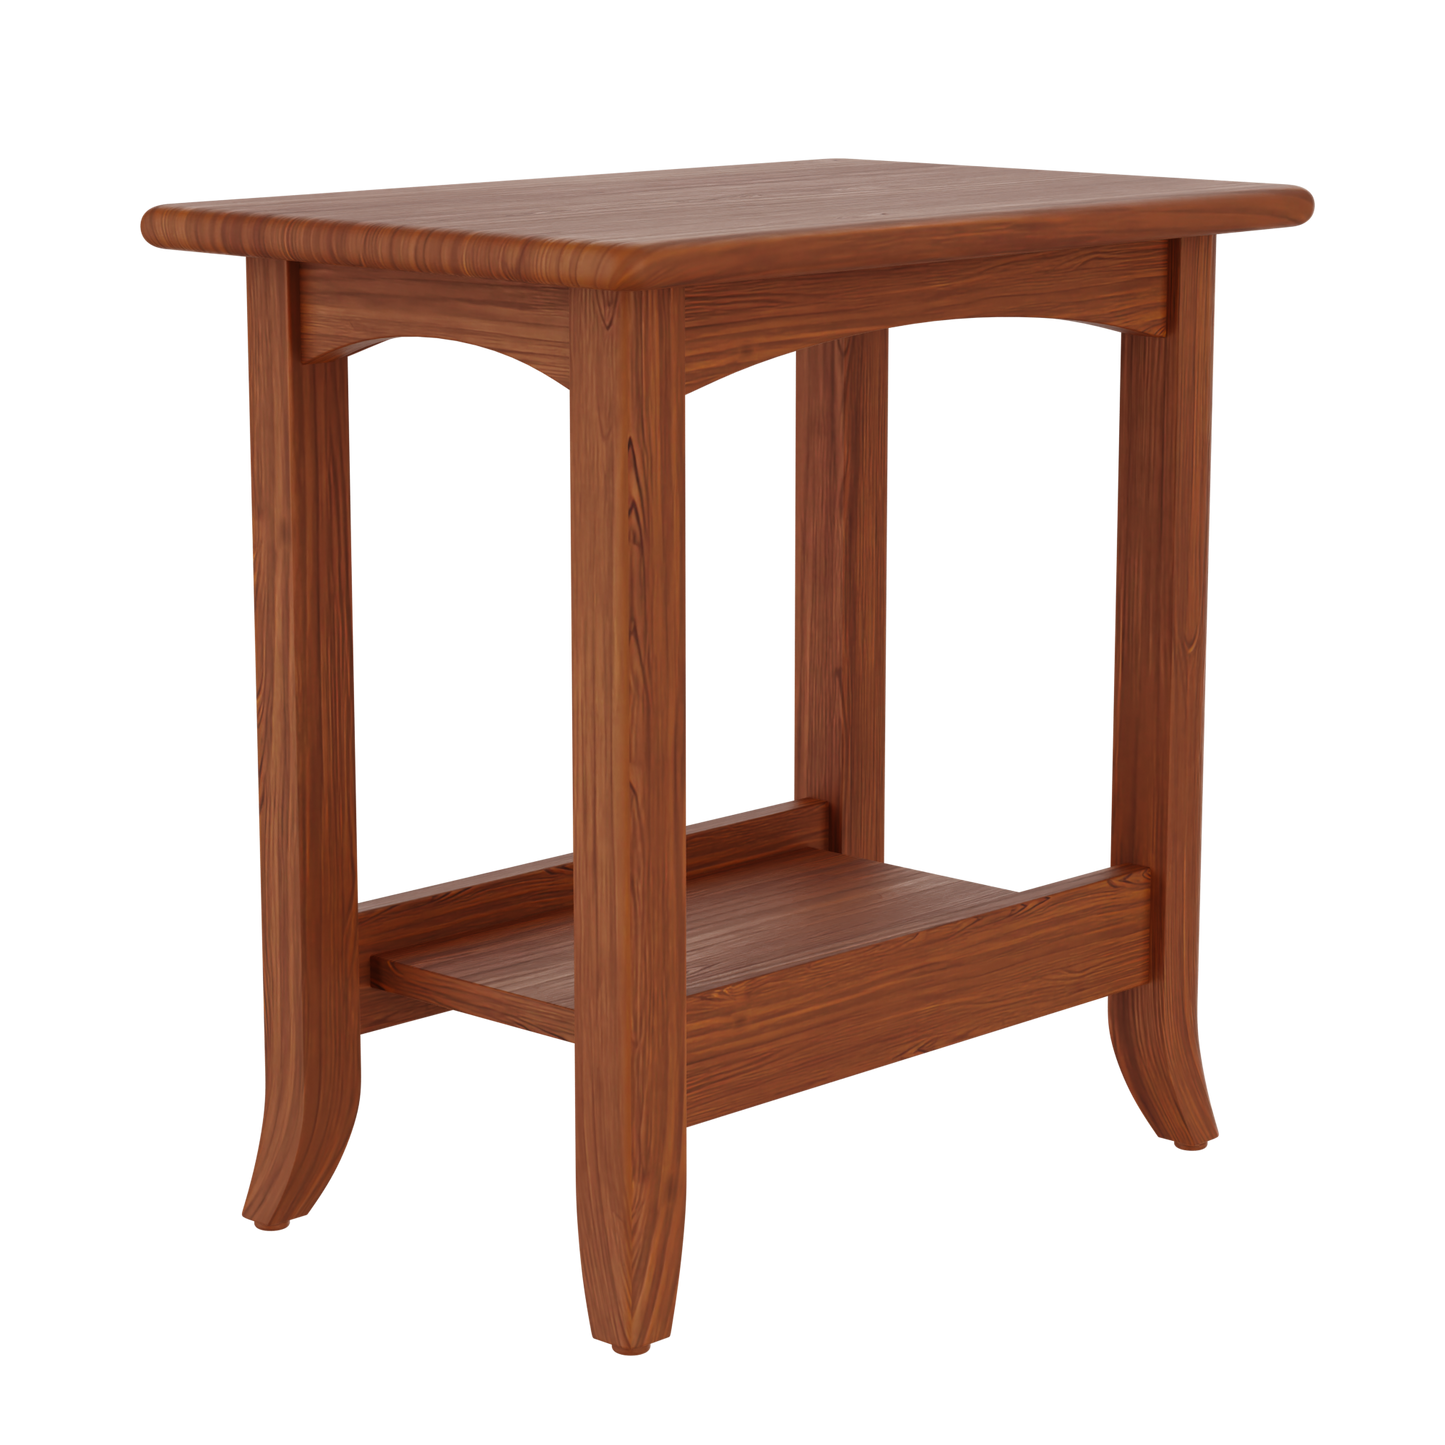 Lakeshore Contemporary Chairside Table